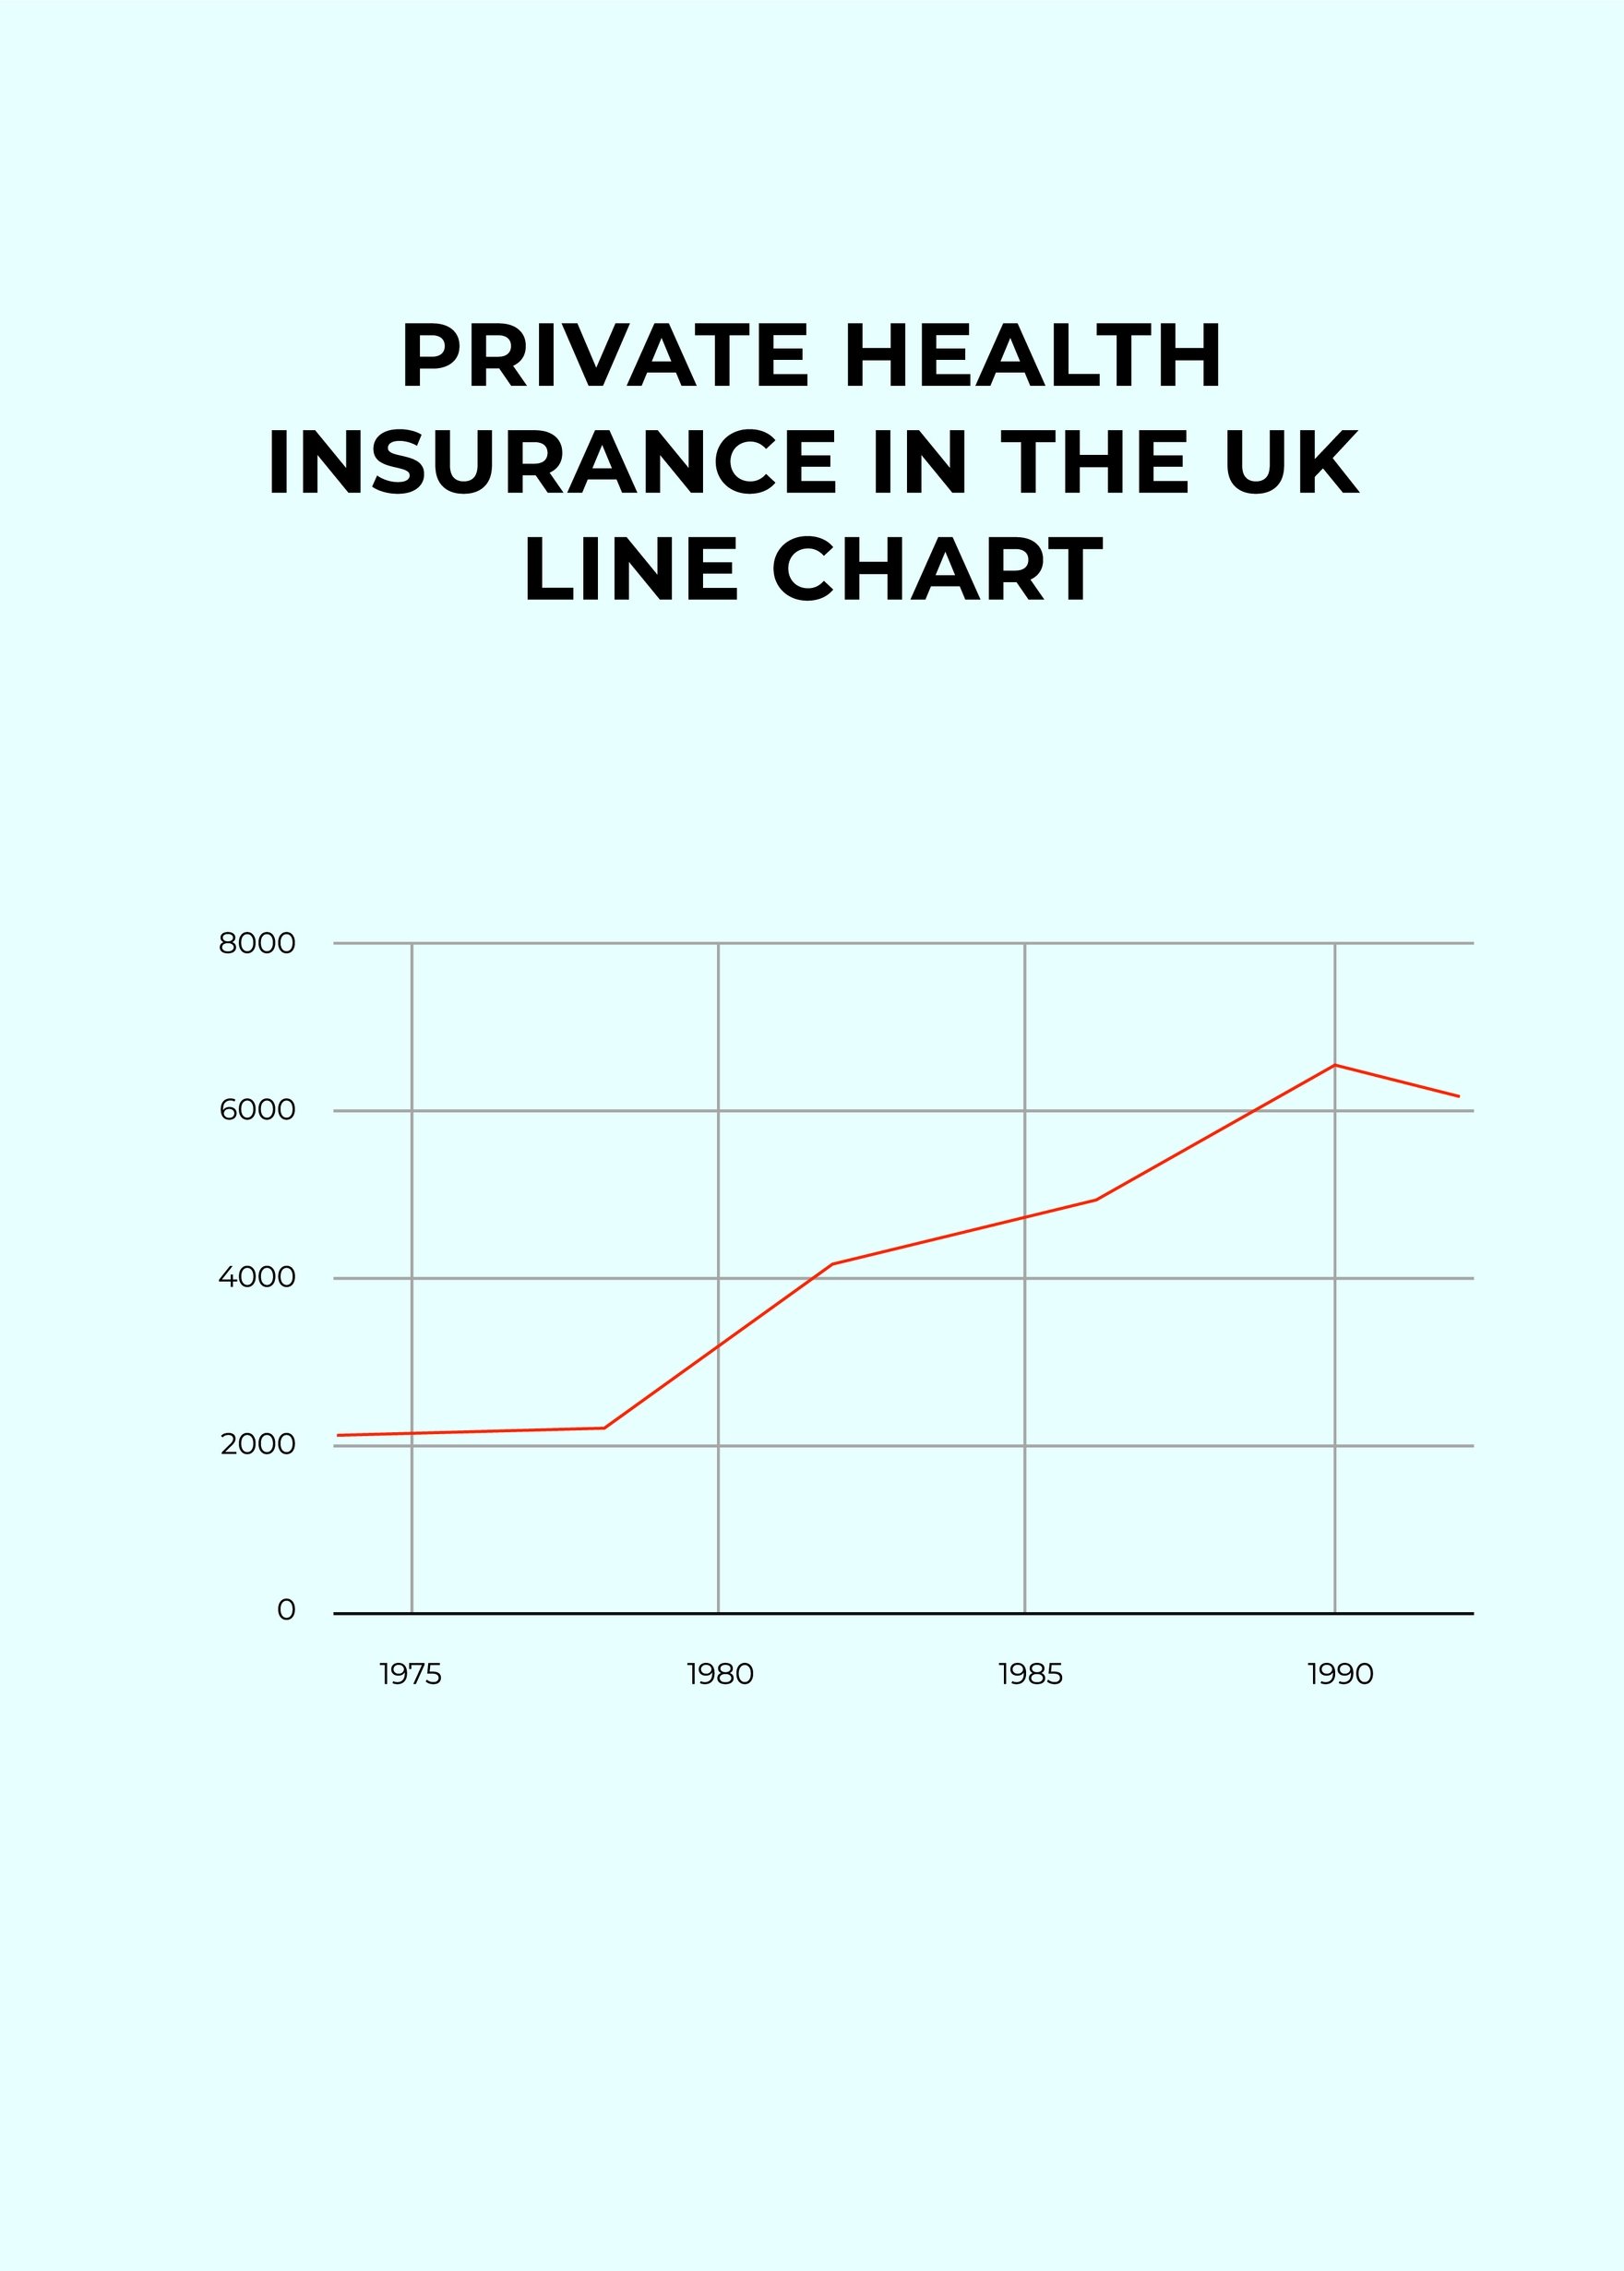 Free Private Health Insurance in the UK Line Chart in PDF, Illustrator